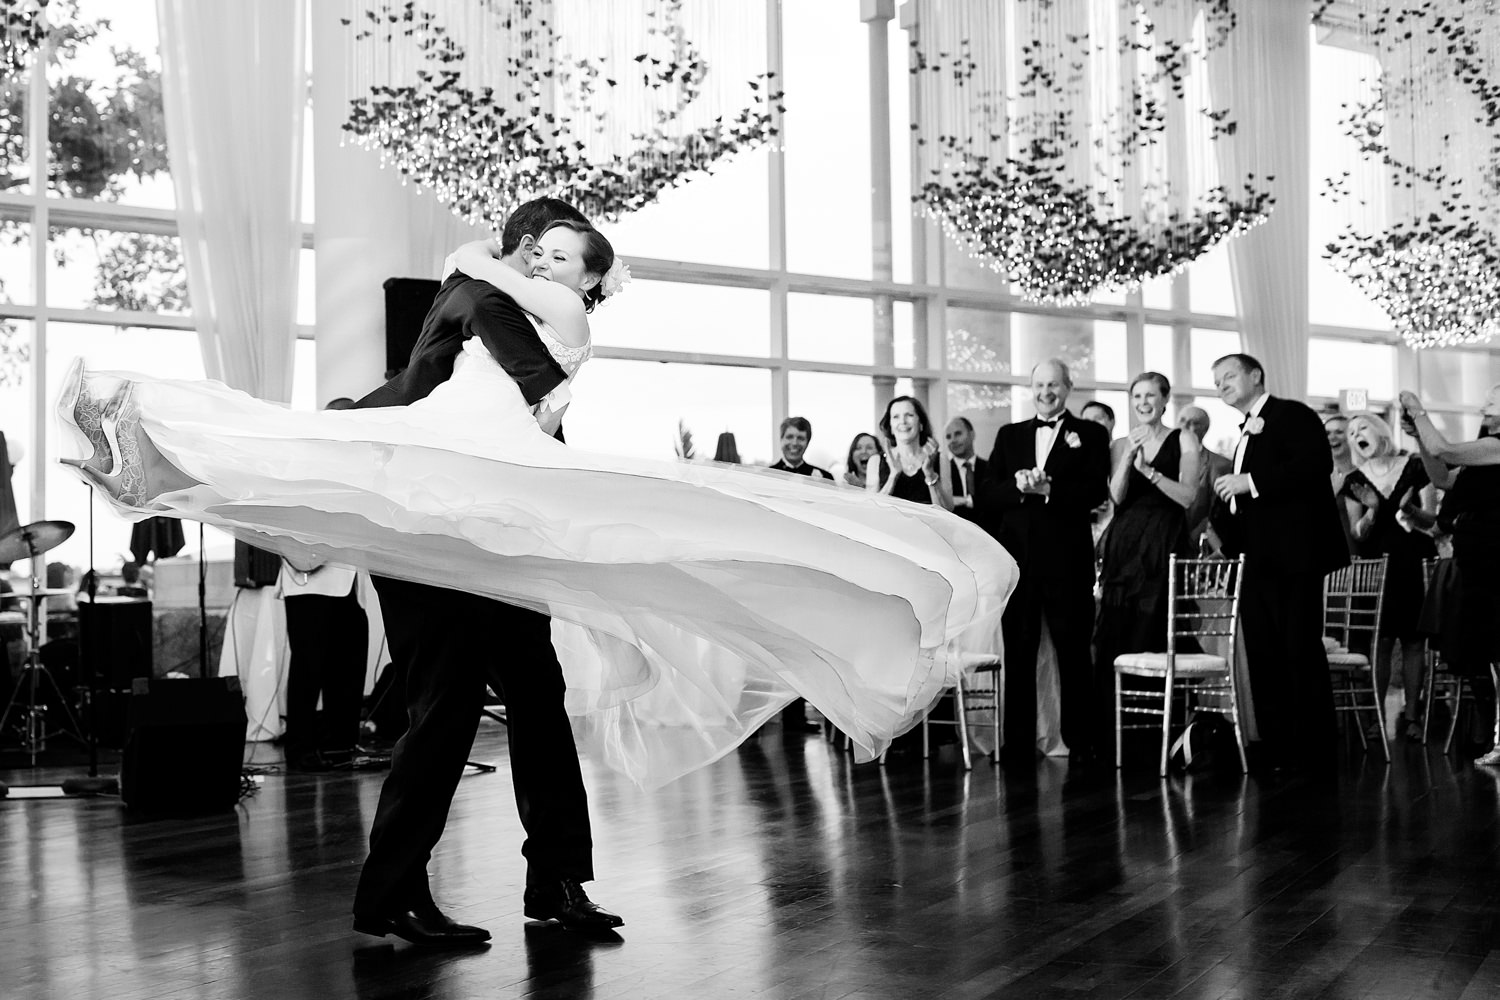 This is a Washington DC, Georgetown, Sequoia wedding, During the first dance, the groom literally sweeps the bride off her feet and twirls her around, This black and white photo shows her dress as it swirls around in the air with the groom carrying the bride in a dizzying circle, Catching the moment, Procopio Photography, best top Washington DC photographer, best top Maryland photographer, best top Virginia photographer, best top DMV photographer, best top wedding photographer, best top commercial photographer, best top portrait photographer, best top boudoir photographer, modern fine art portraits, dramatic, unique, different, bold, editorial, photojournalism, award winning photographer, published photographer, memorable images, be different, stand out